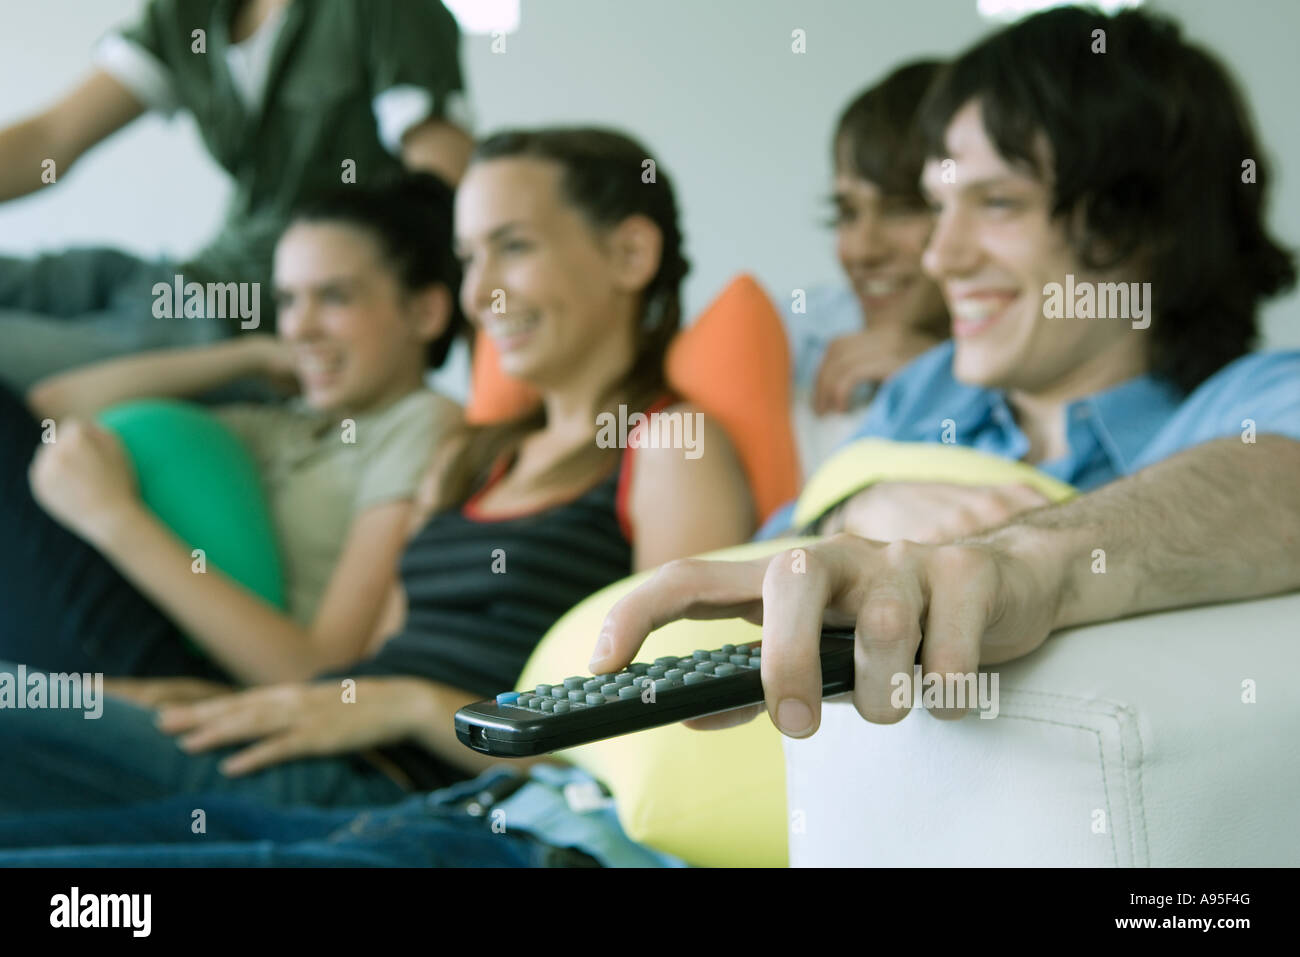 Teenage friends watching TV together, focus on remote control in foreground Stock Photo